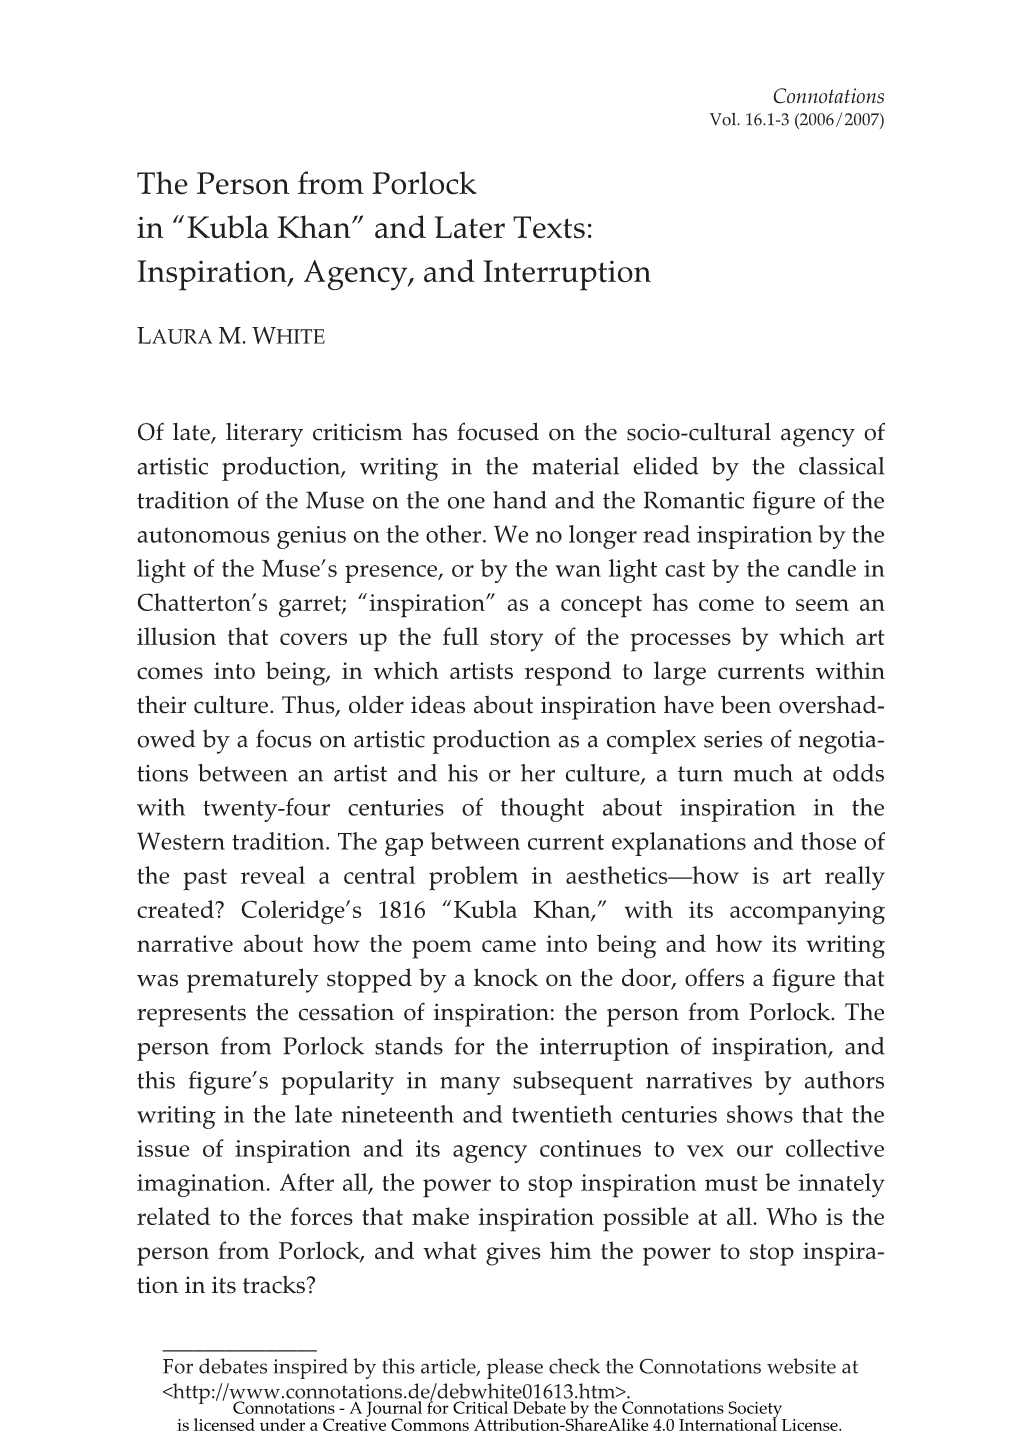 Kubla Khan” and Later Texts: Inspiration, Agency, and Interruption